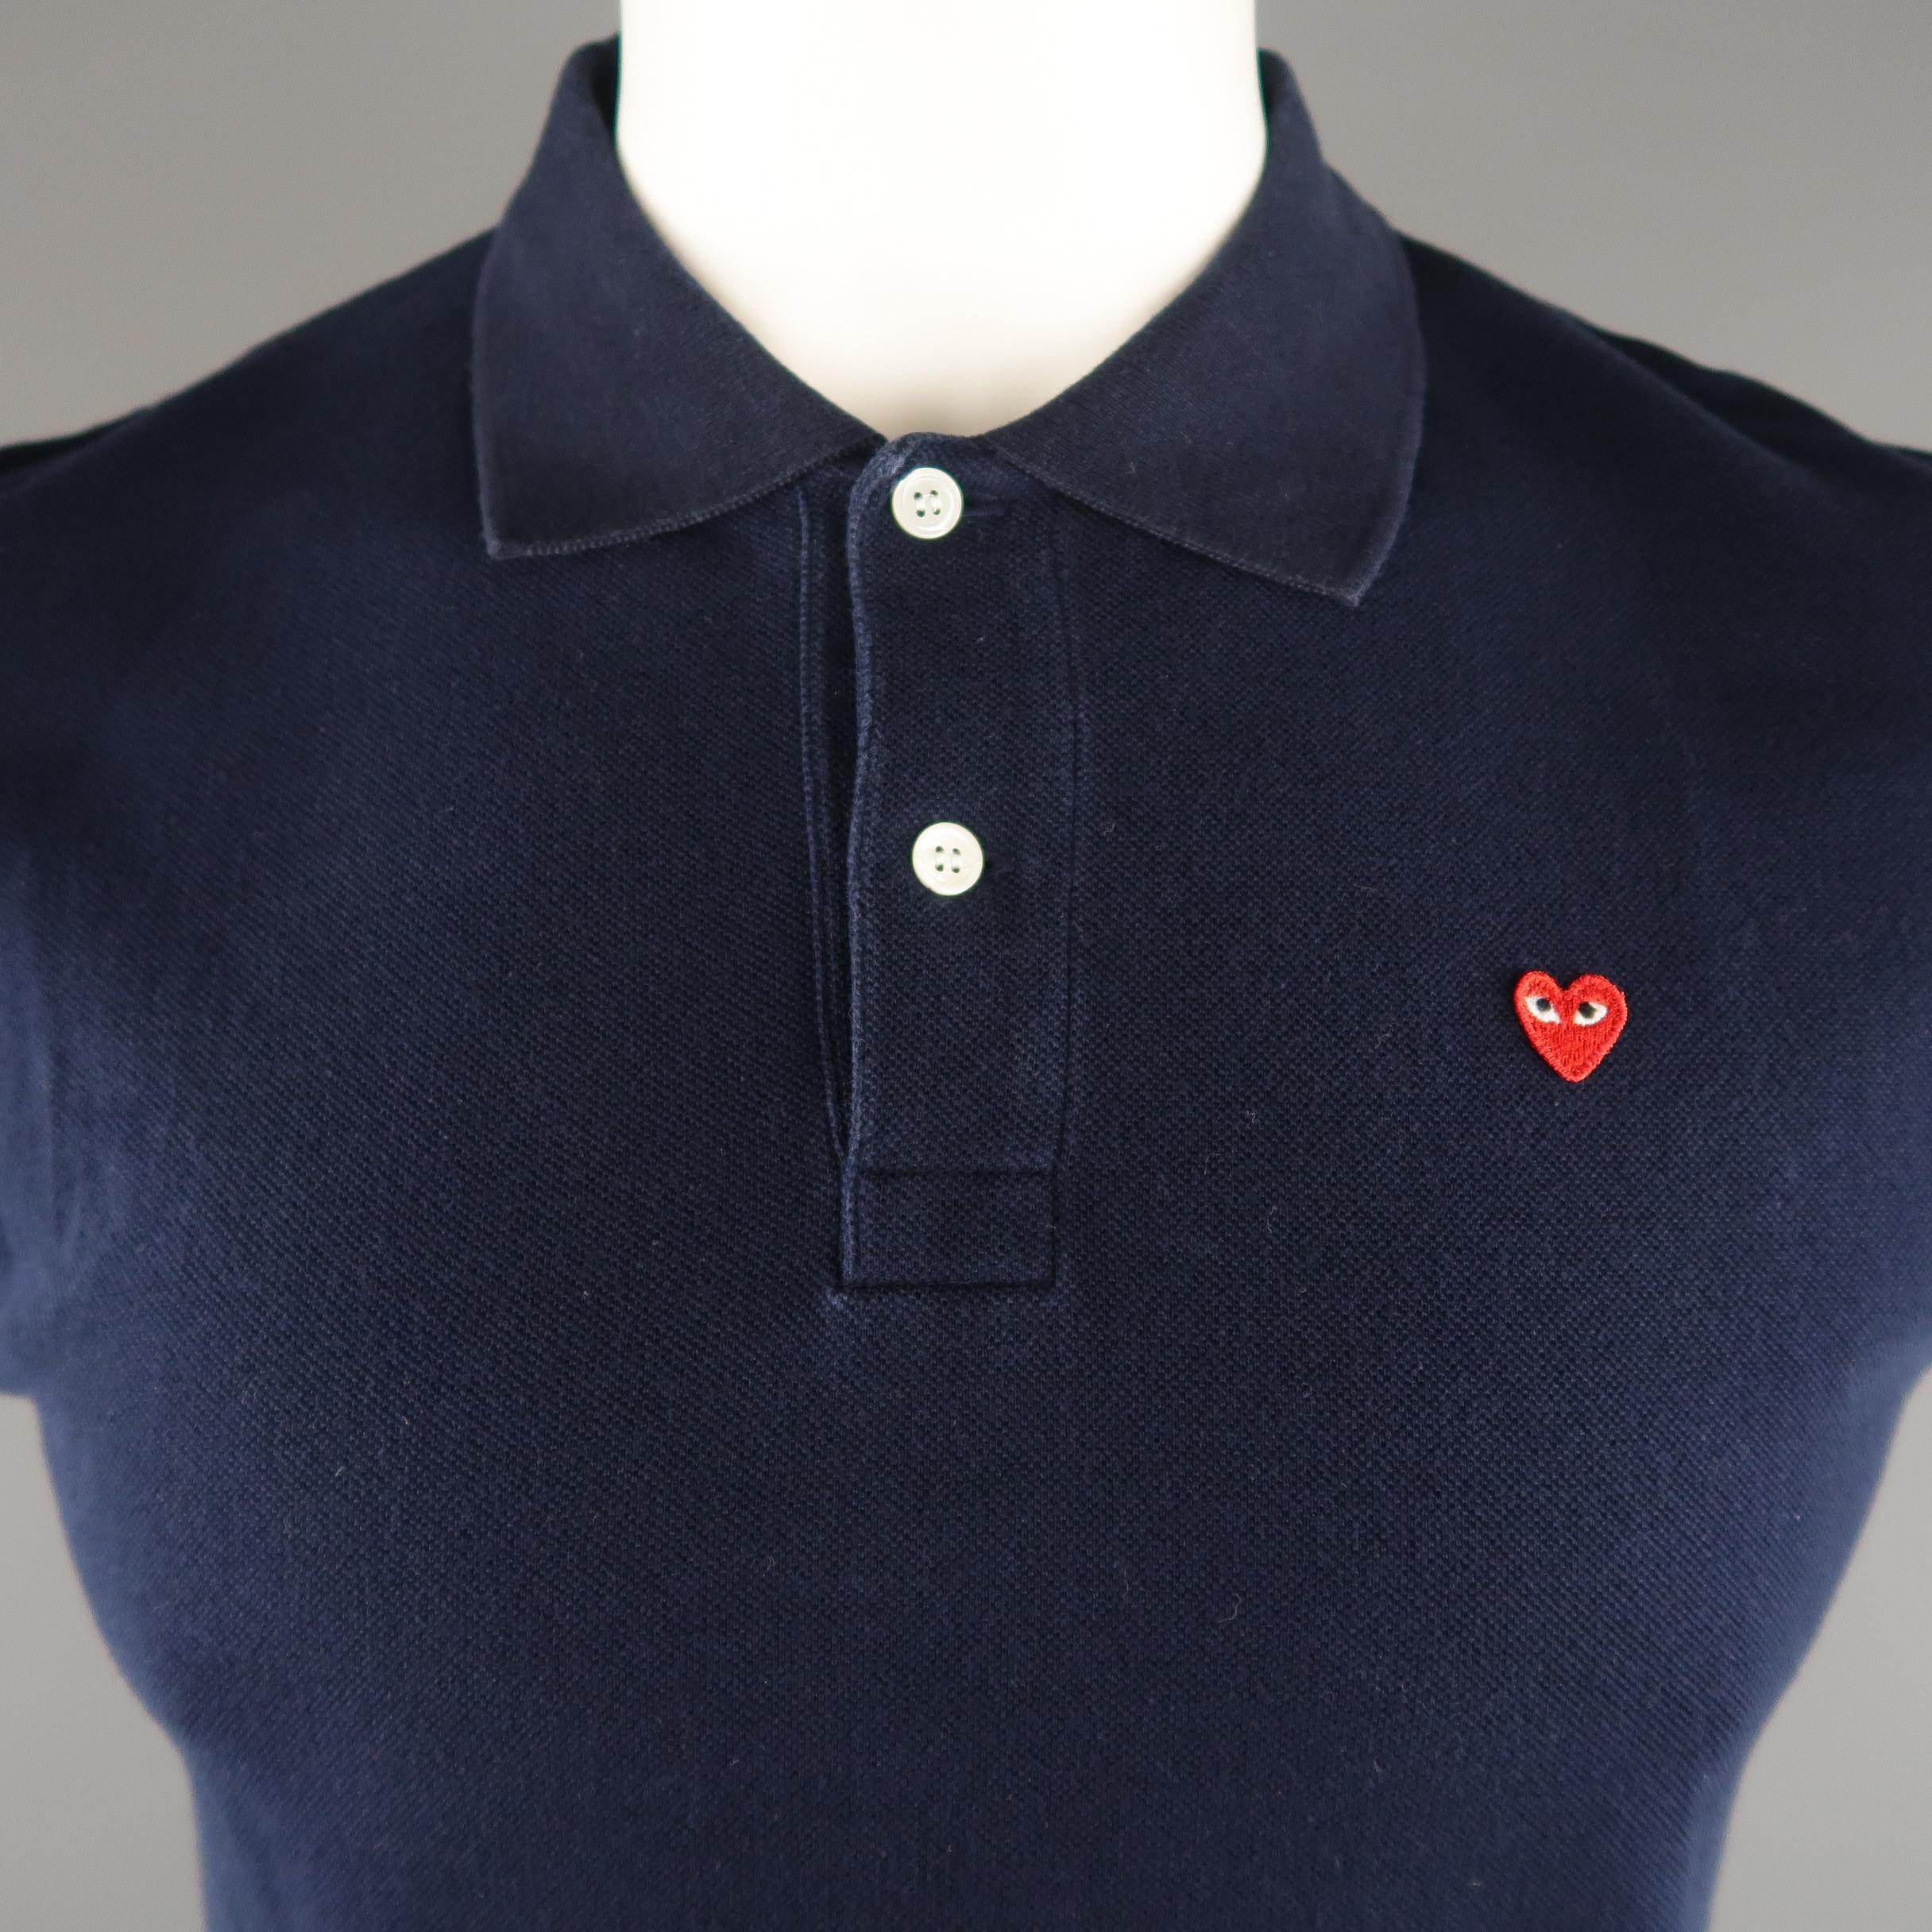 PLAY by COMME DES GARCONS POLO shirt comes in a navy solid pique cotton with contrast red logo and buttoned.  Minor wear.
 
Good Pre-Owned Condition.
Marked: L
 
Measurements:
 
Shoulder: 18.5  in.
Chest: 40 in.
Sleeve: 7.5 in.
Length: 27.5  in.